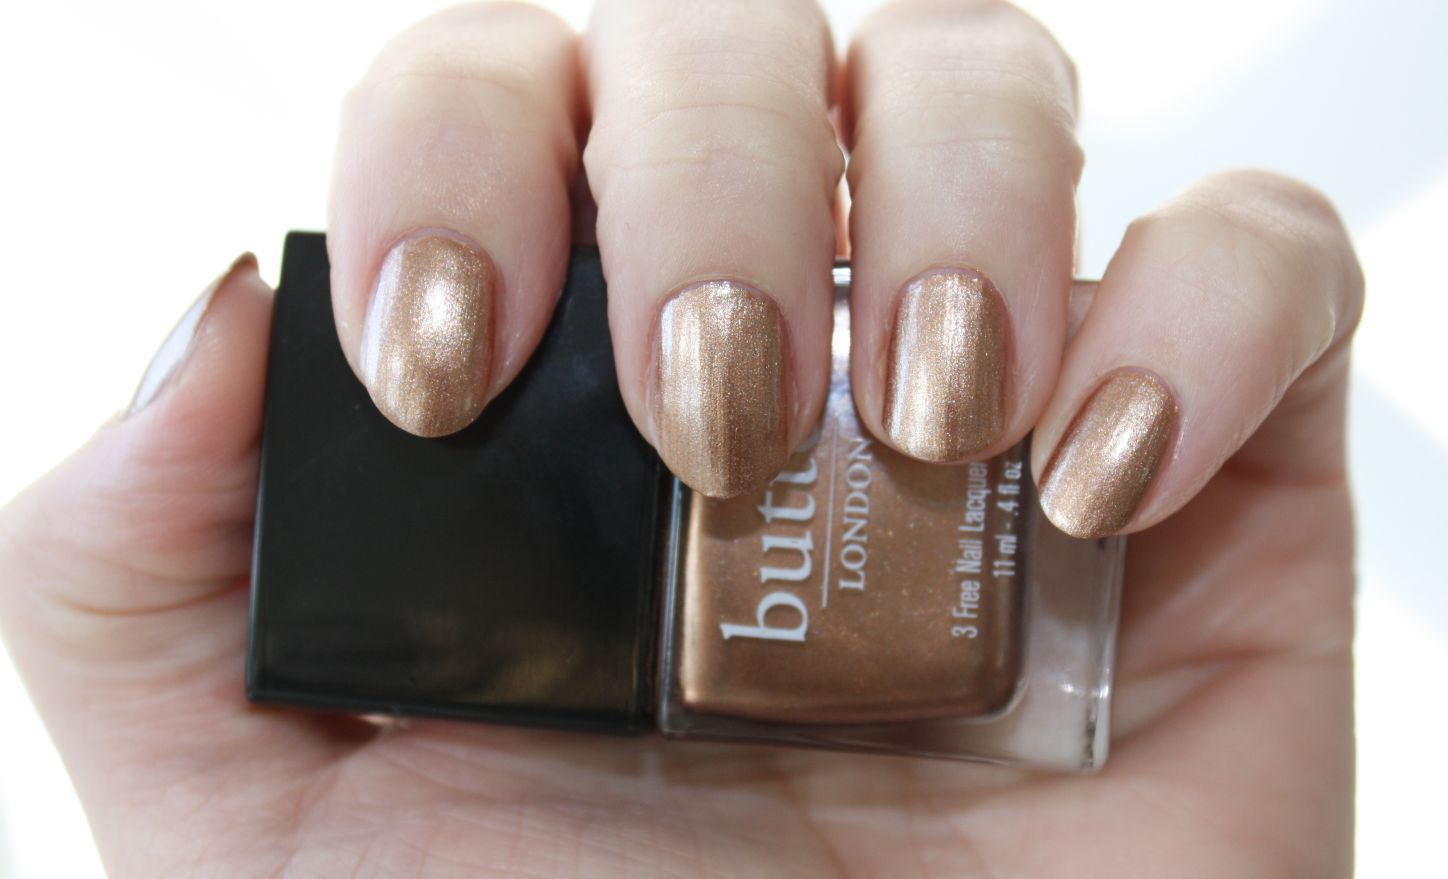 Butter London Spin the Bottle Nail Polish - wide 9